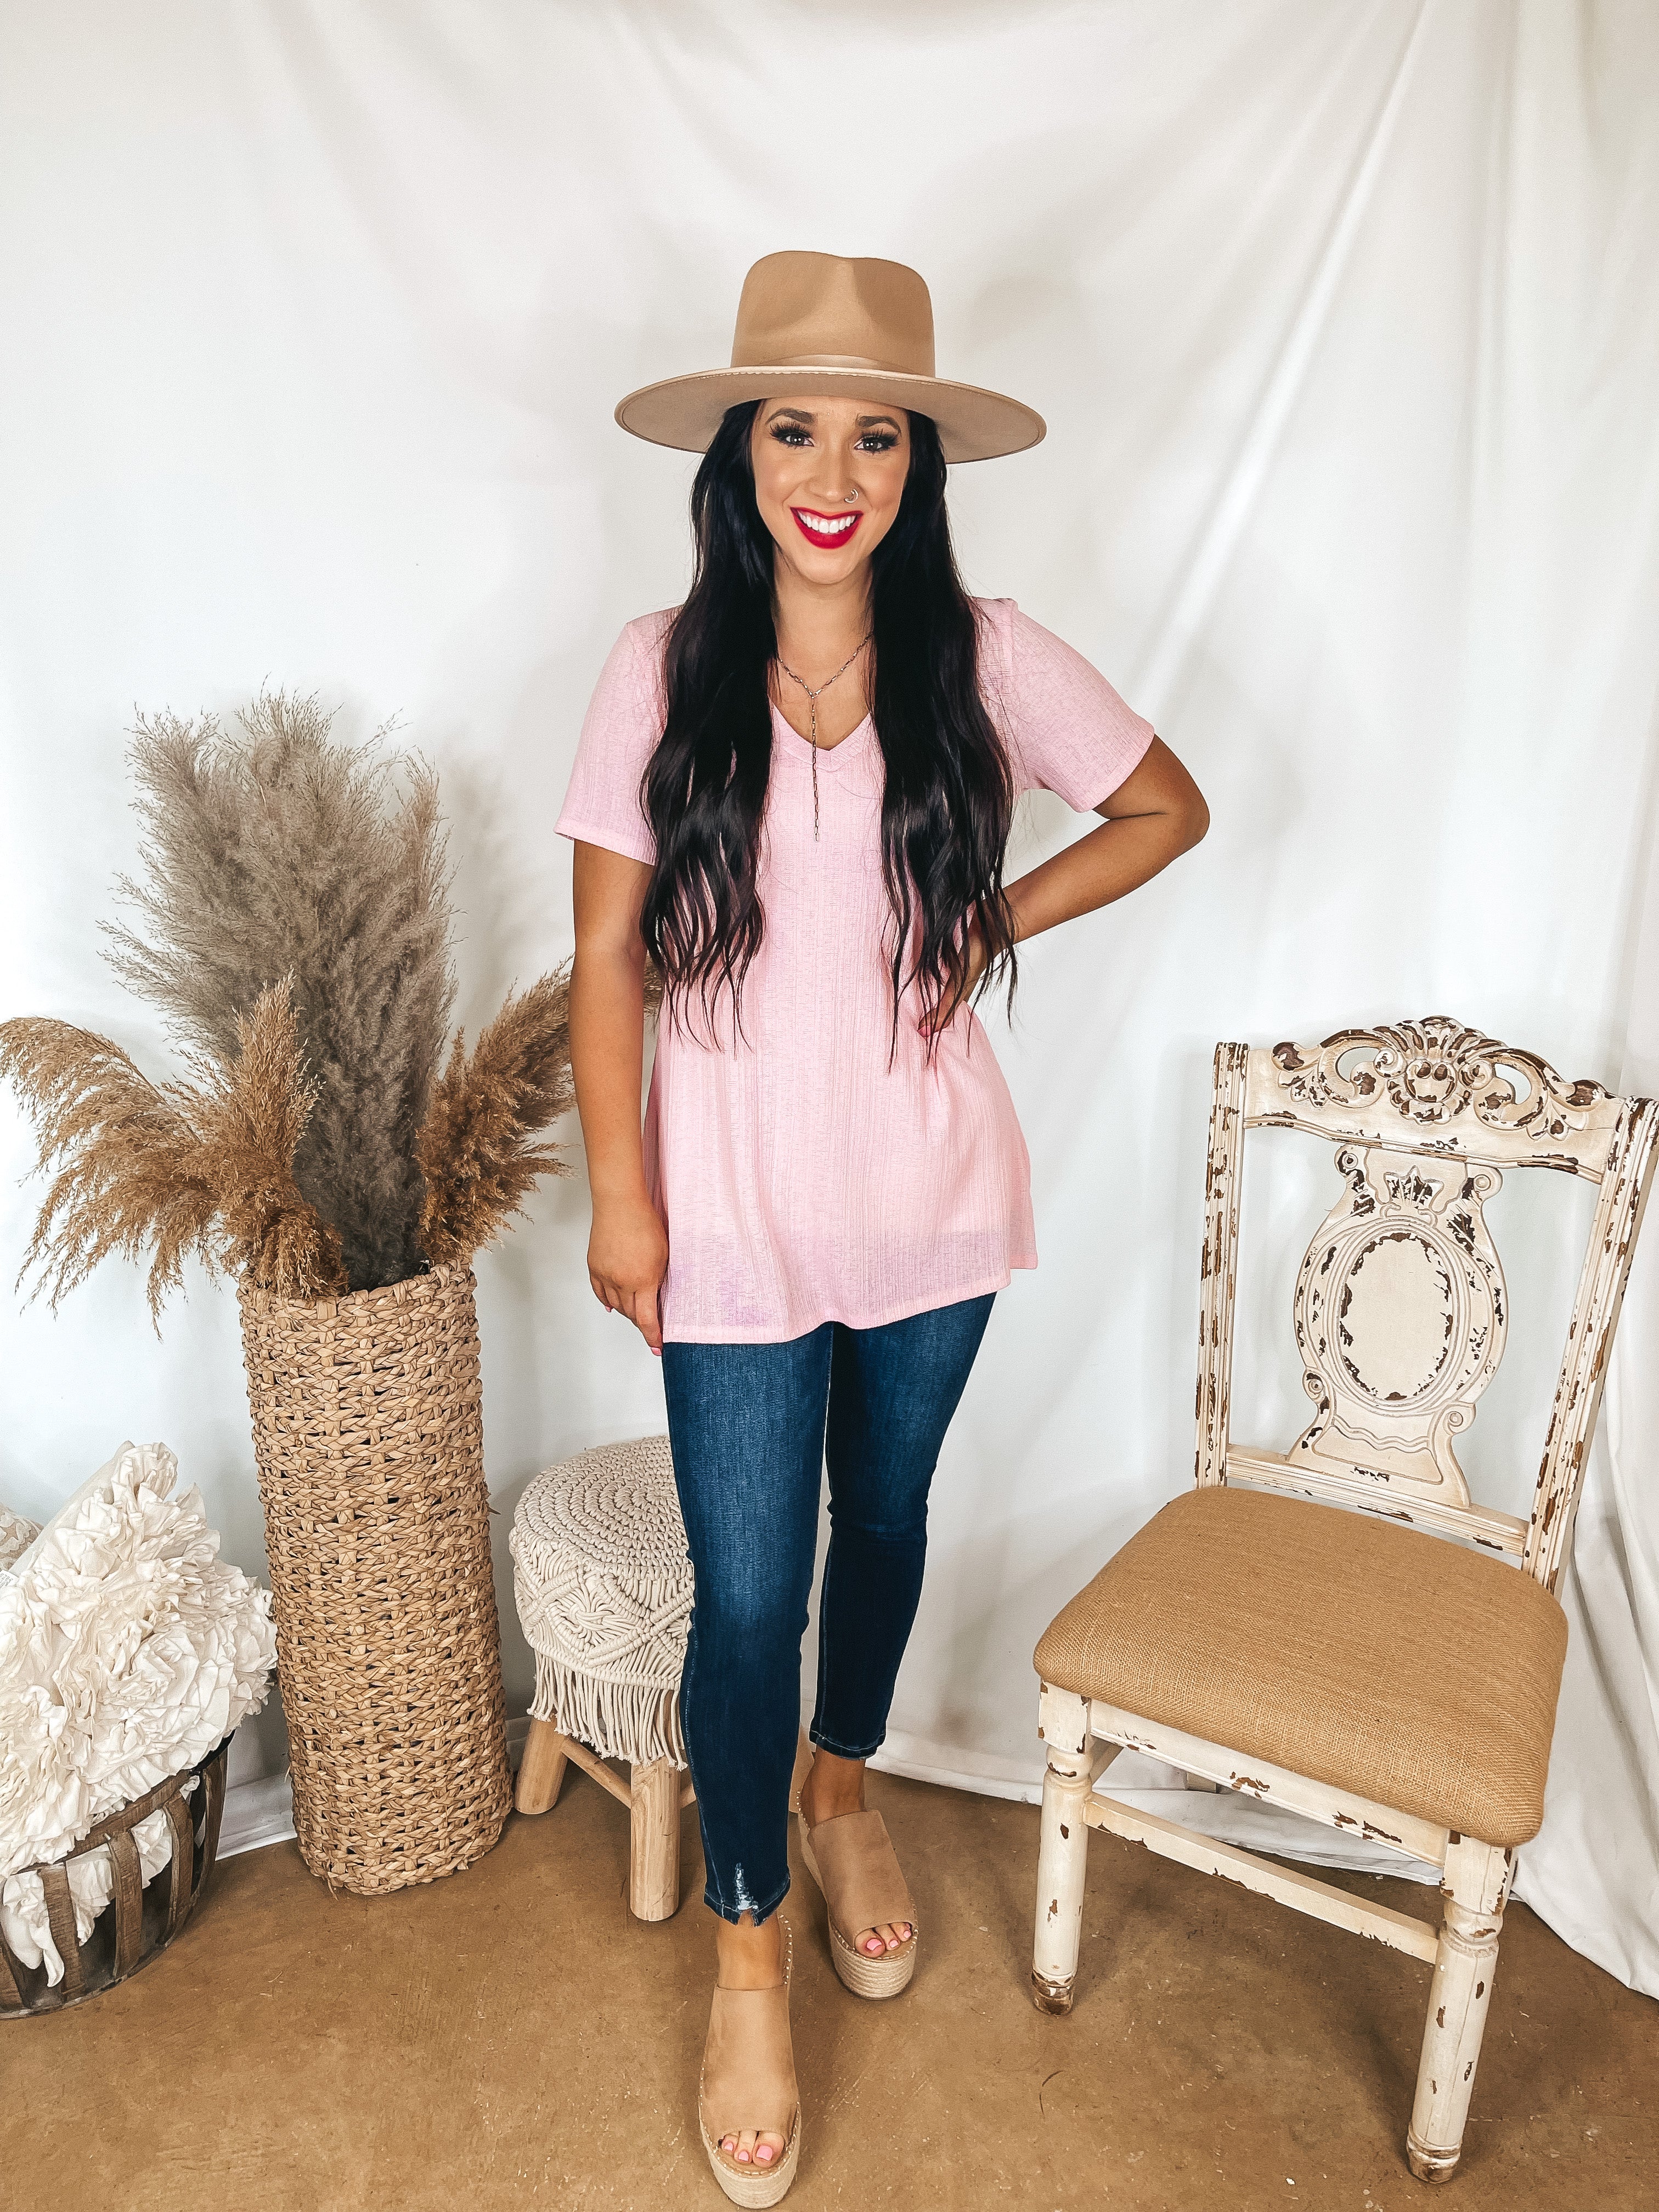 Looking For You Short Sleeve V Neck Top in Light Pink - Giddy Up Glamour Boutique